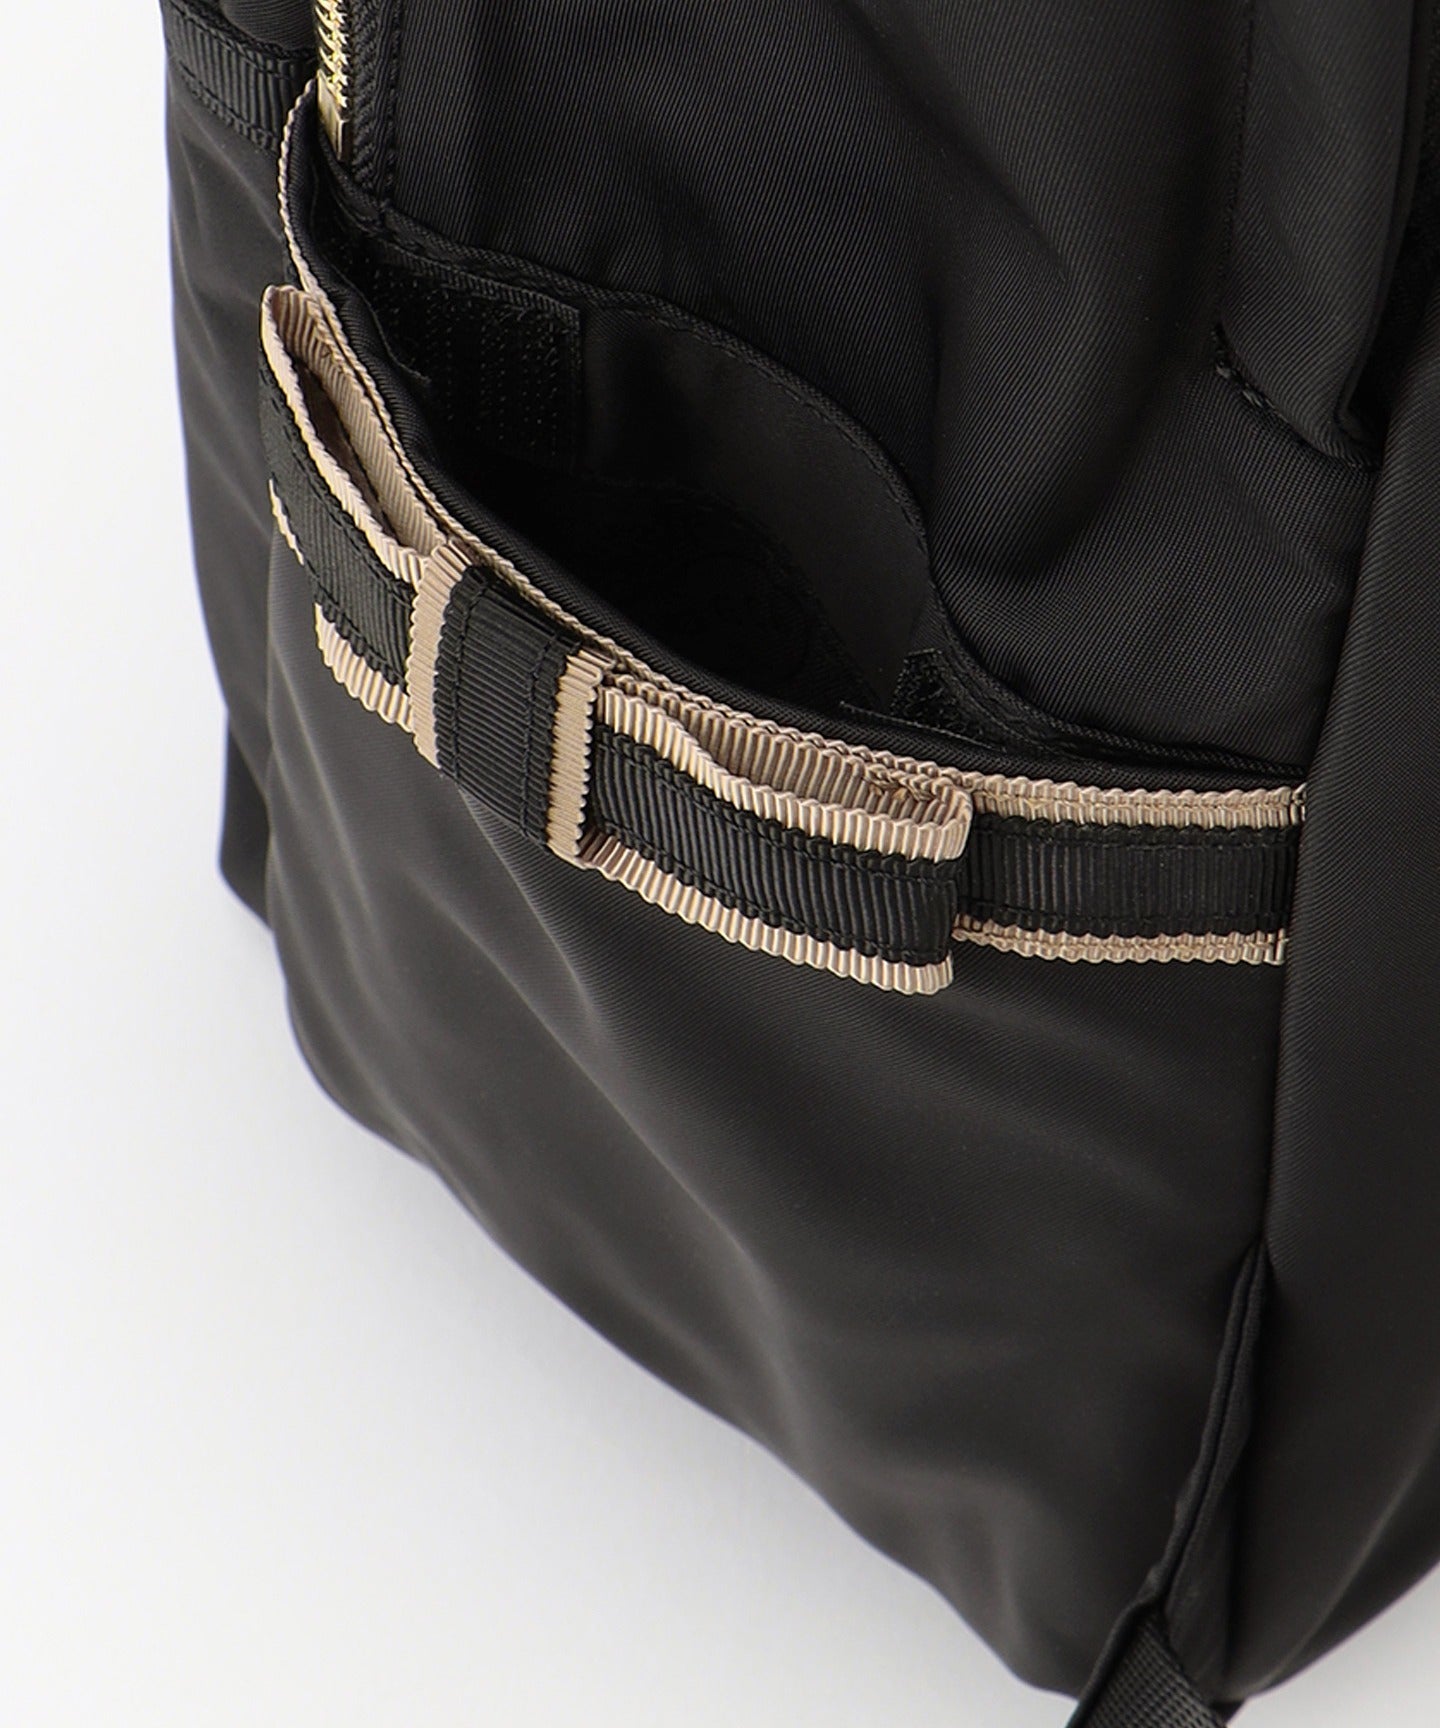 SIDE RIBBON BACKPACK – TOCCA OFFICIAL SITE